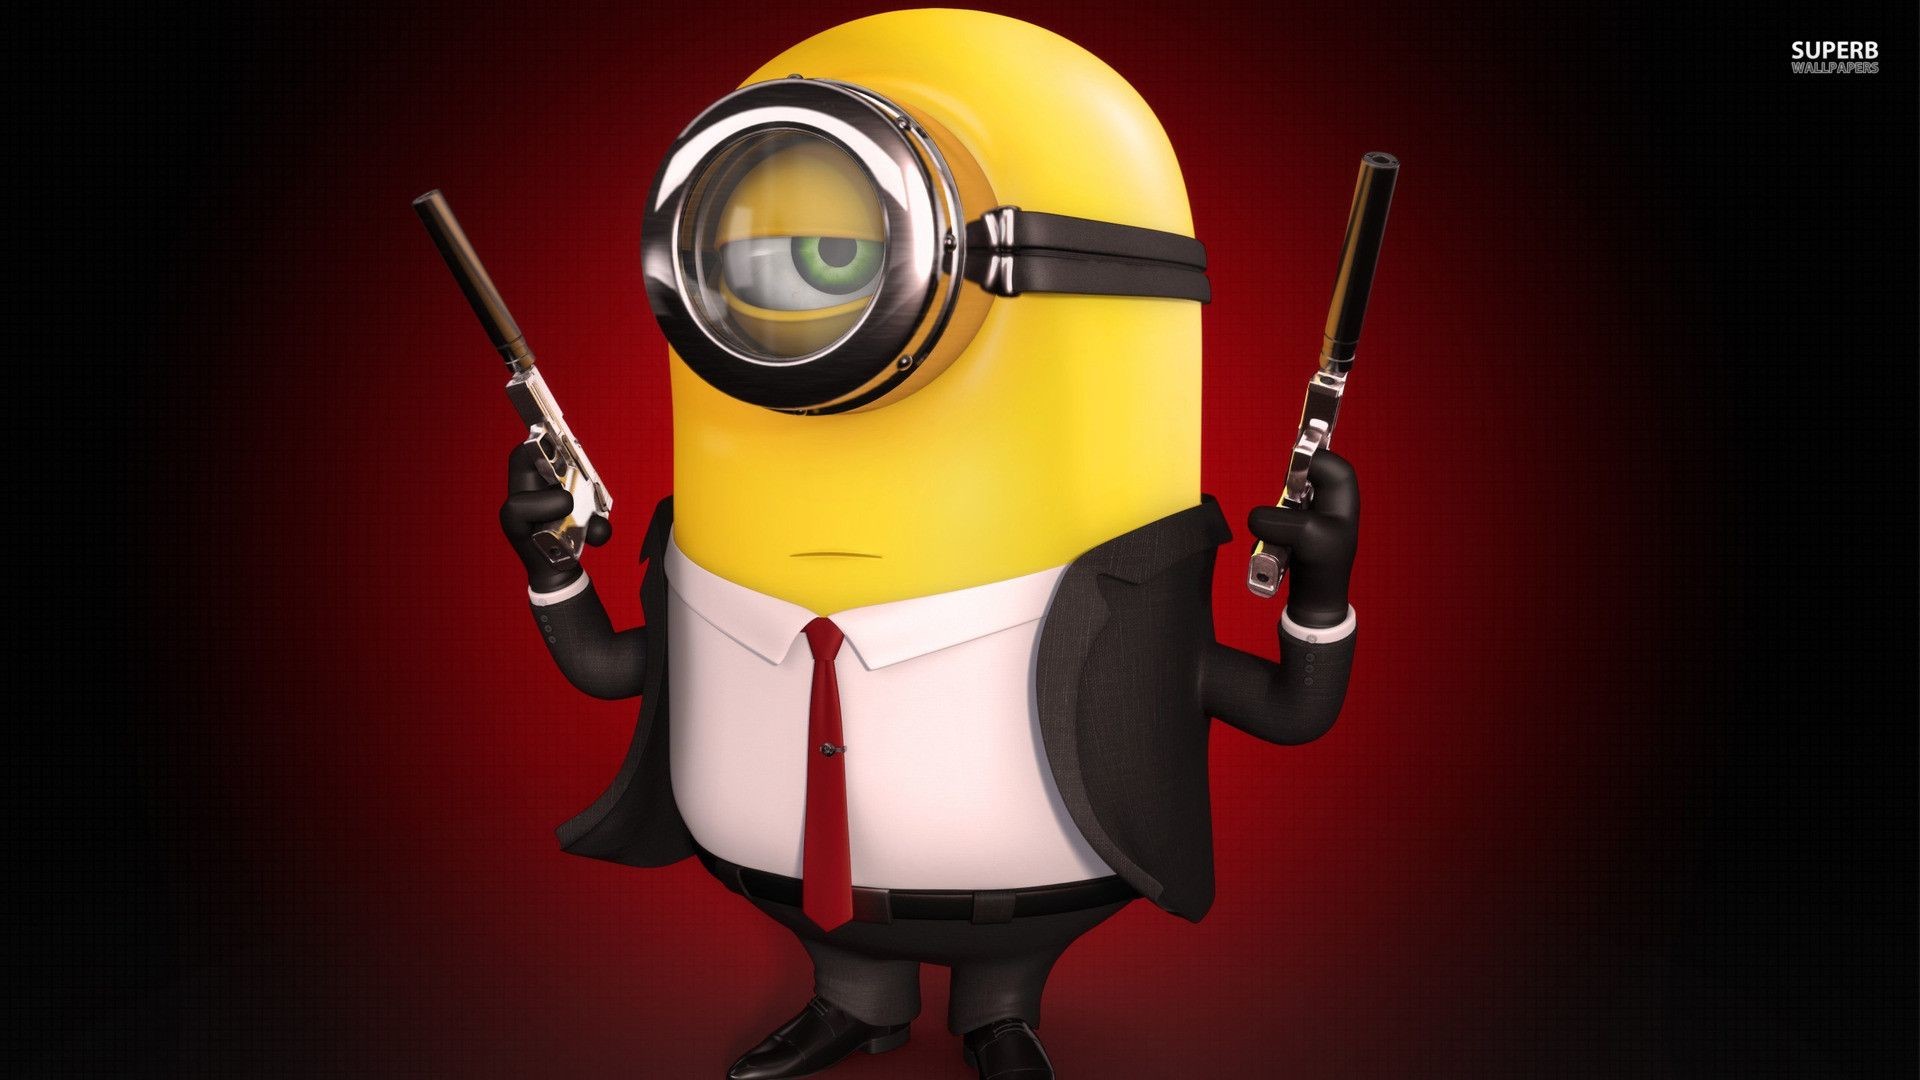 1920x1080 Quality Cool Minion Wallpapers. Quality Cool Minion Wallpapers.  px. 152.59 KB. Original Resolution ()